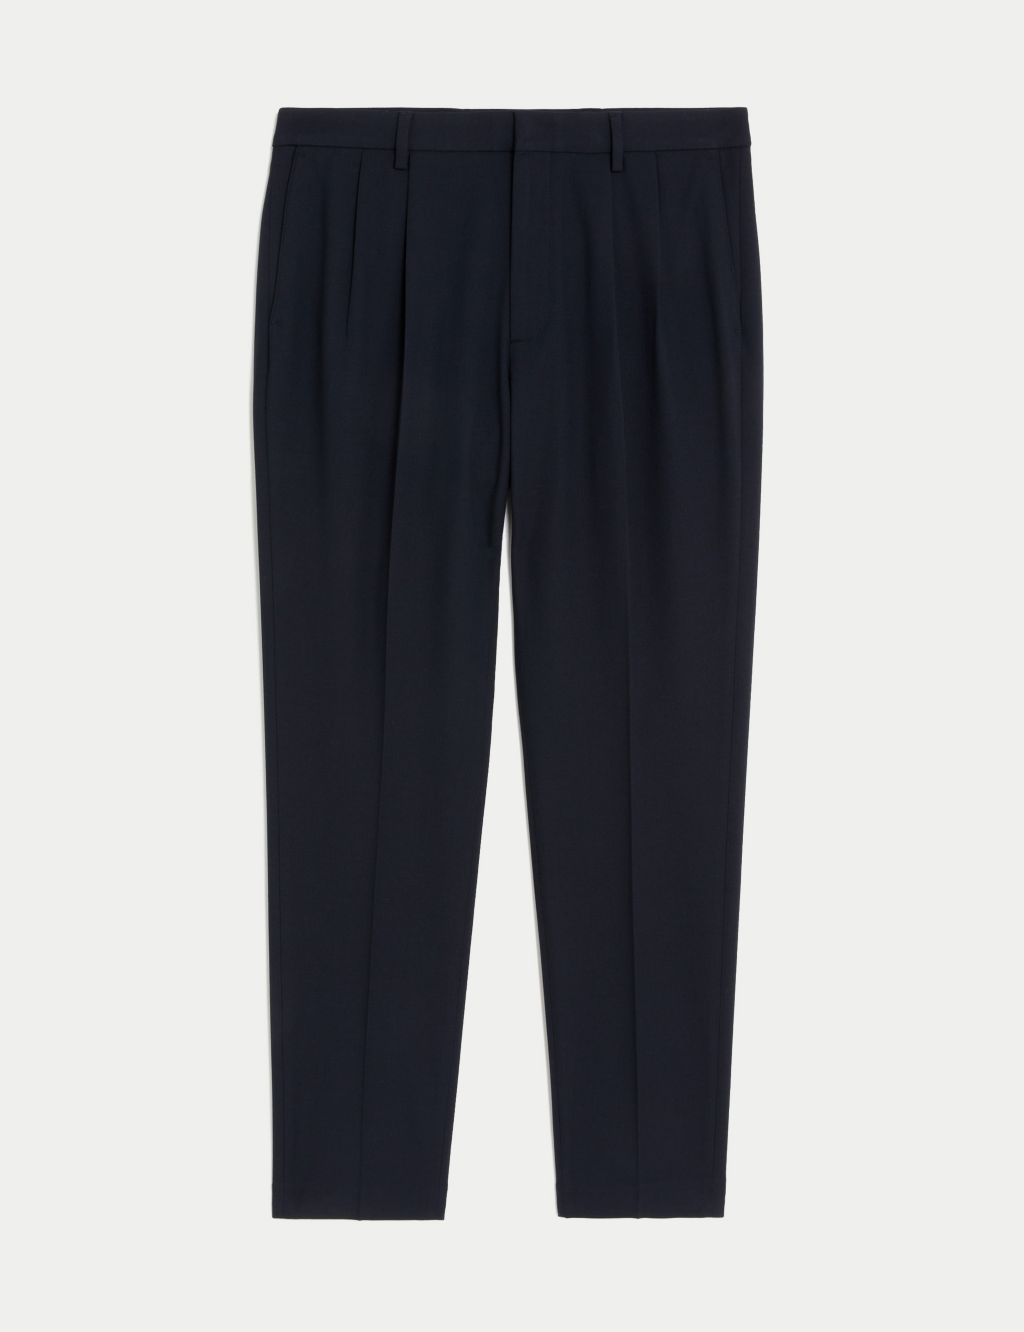 Twin Pleat Stretch Trousers image 7